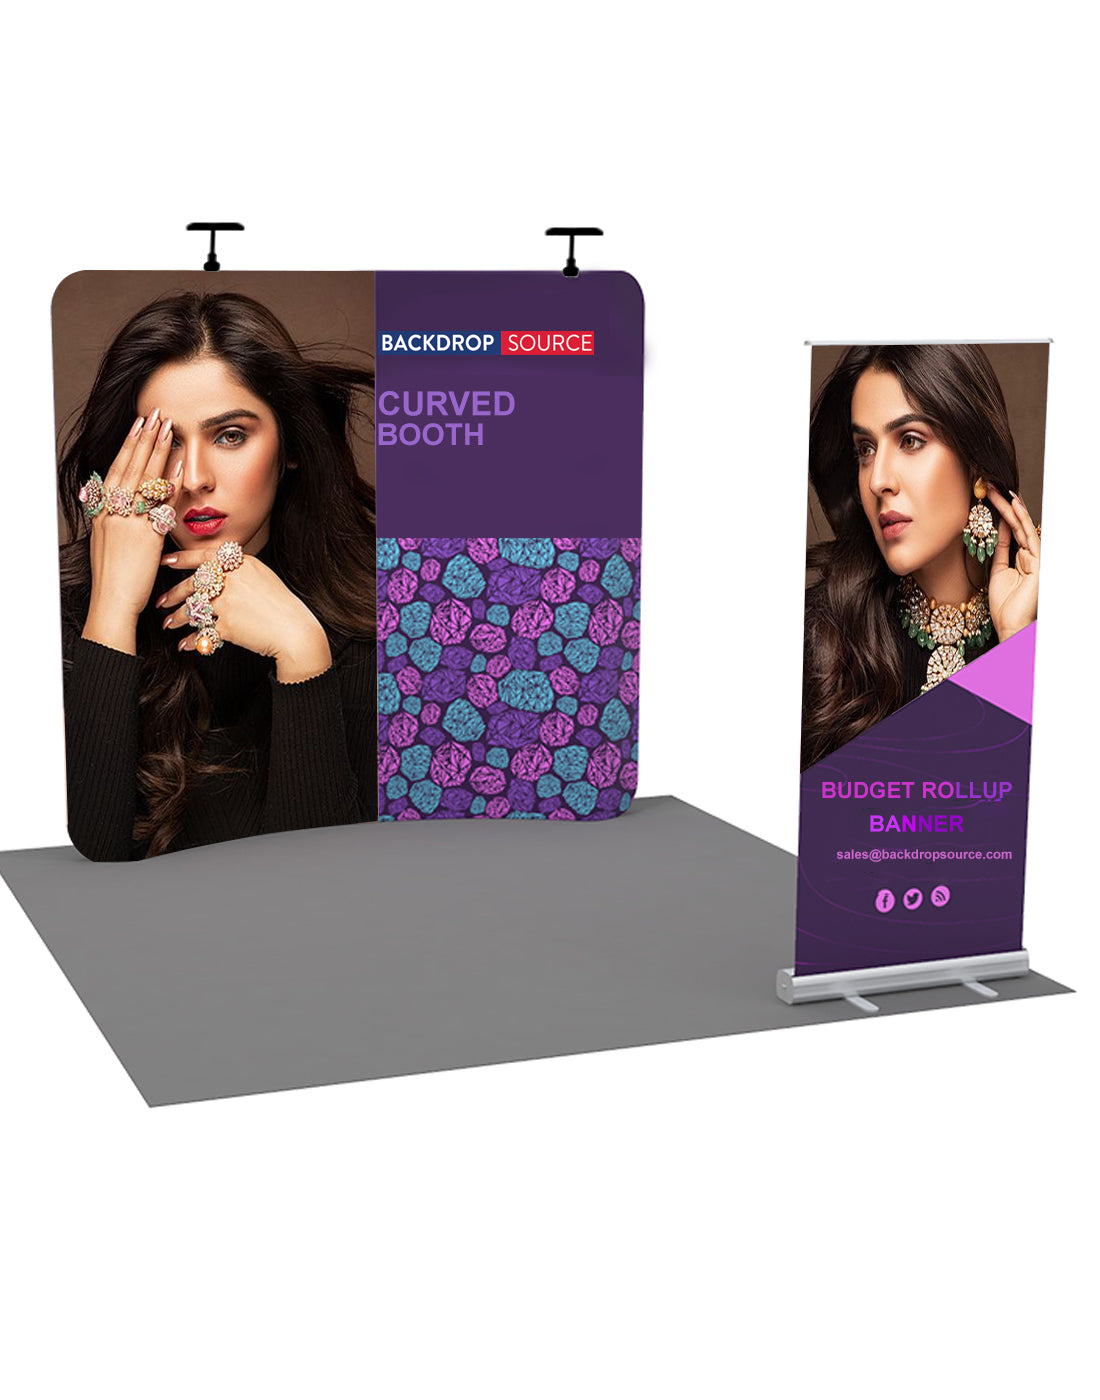 10x10 Booth Kit with Backwall and Rollup Banner Stand